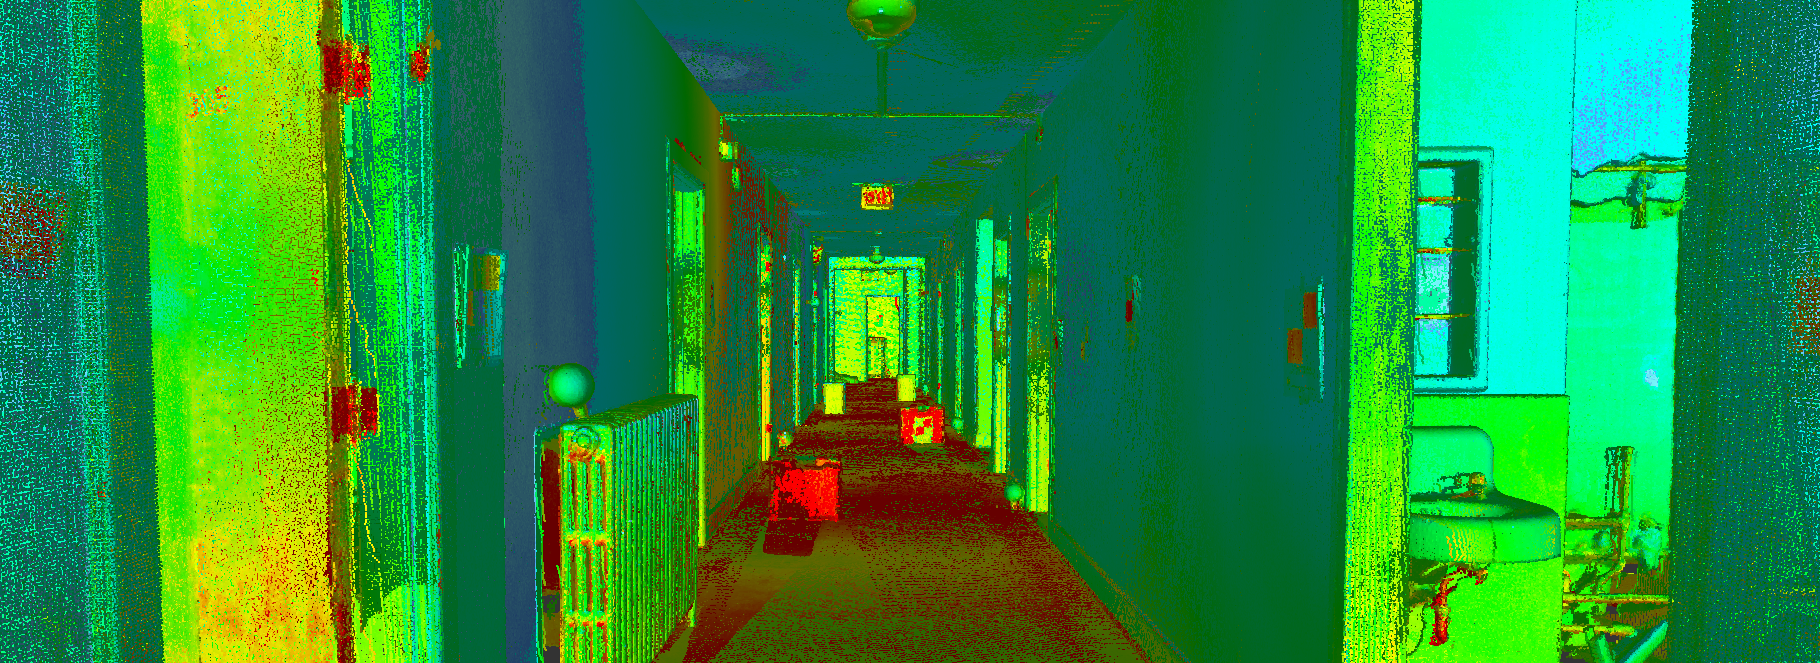 laser scan point cloud of healthcare facility